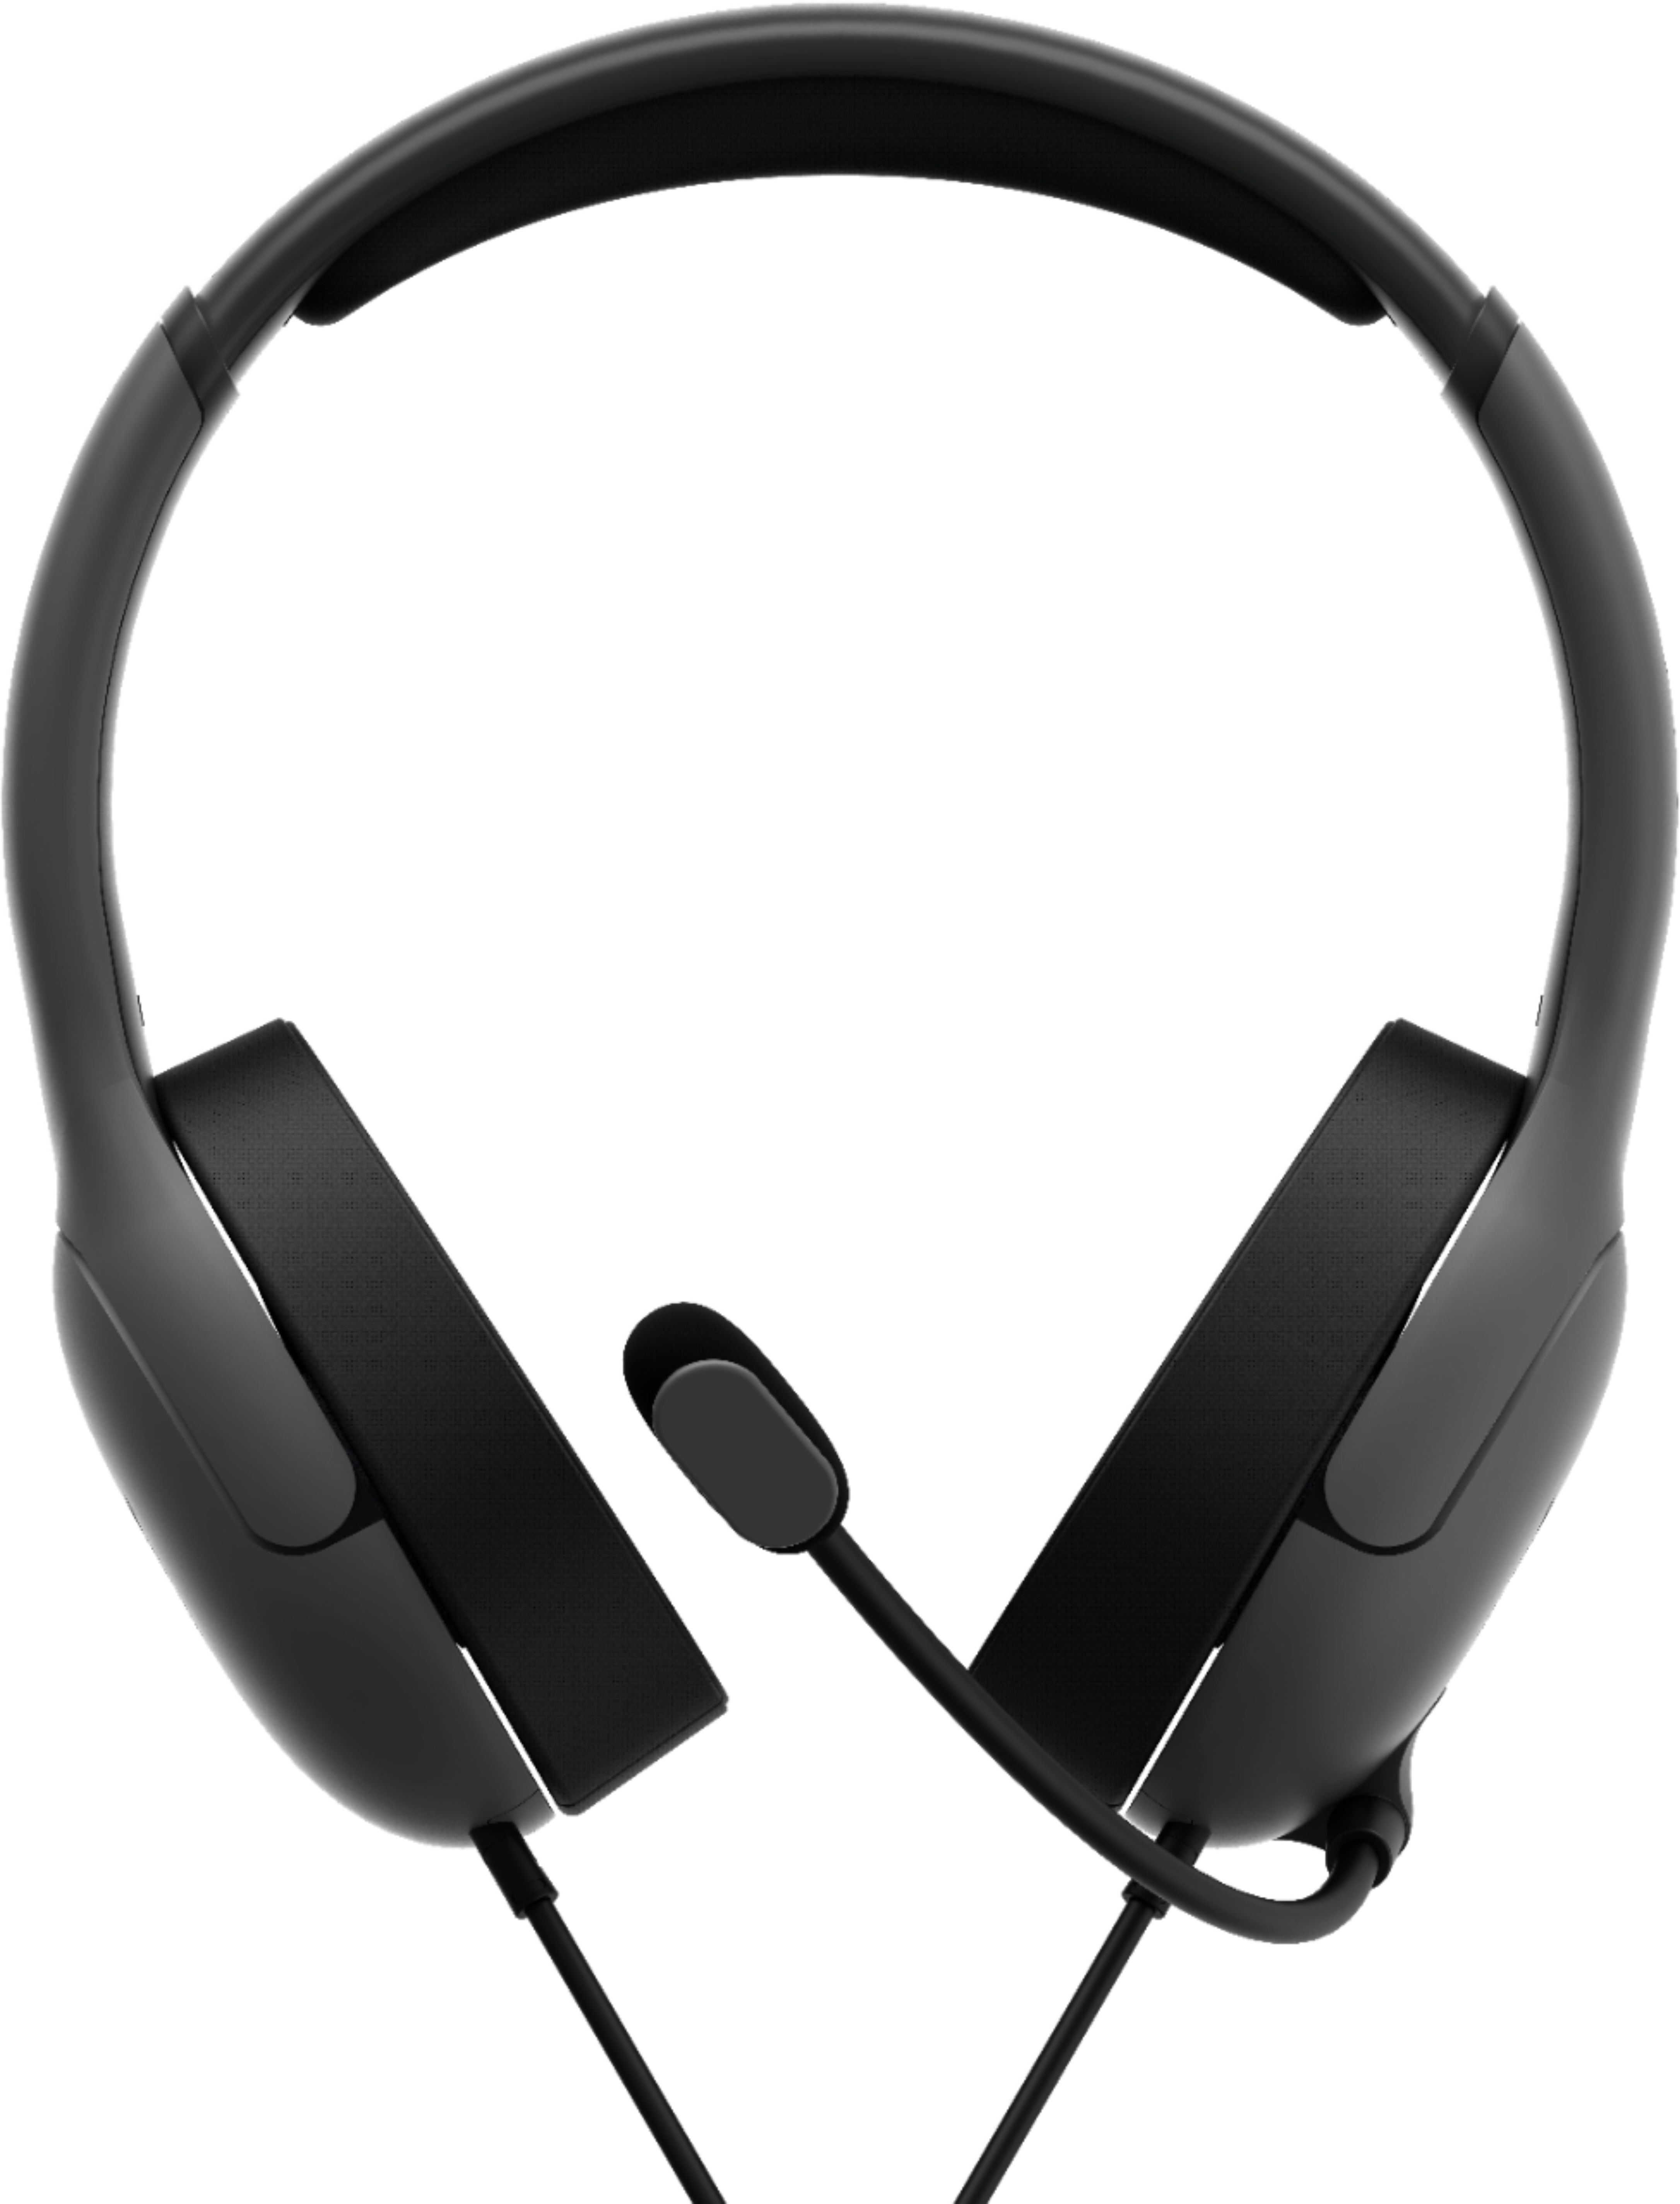 Best Buy: Afterglow LVL 40 Wired Stereo Gaming Headset for Xbox 